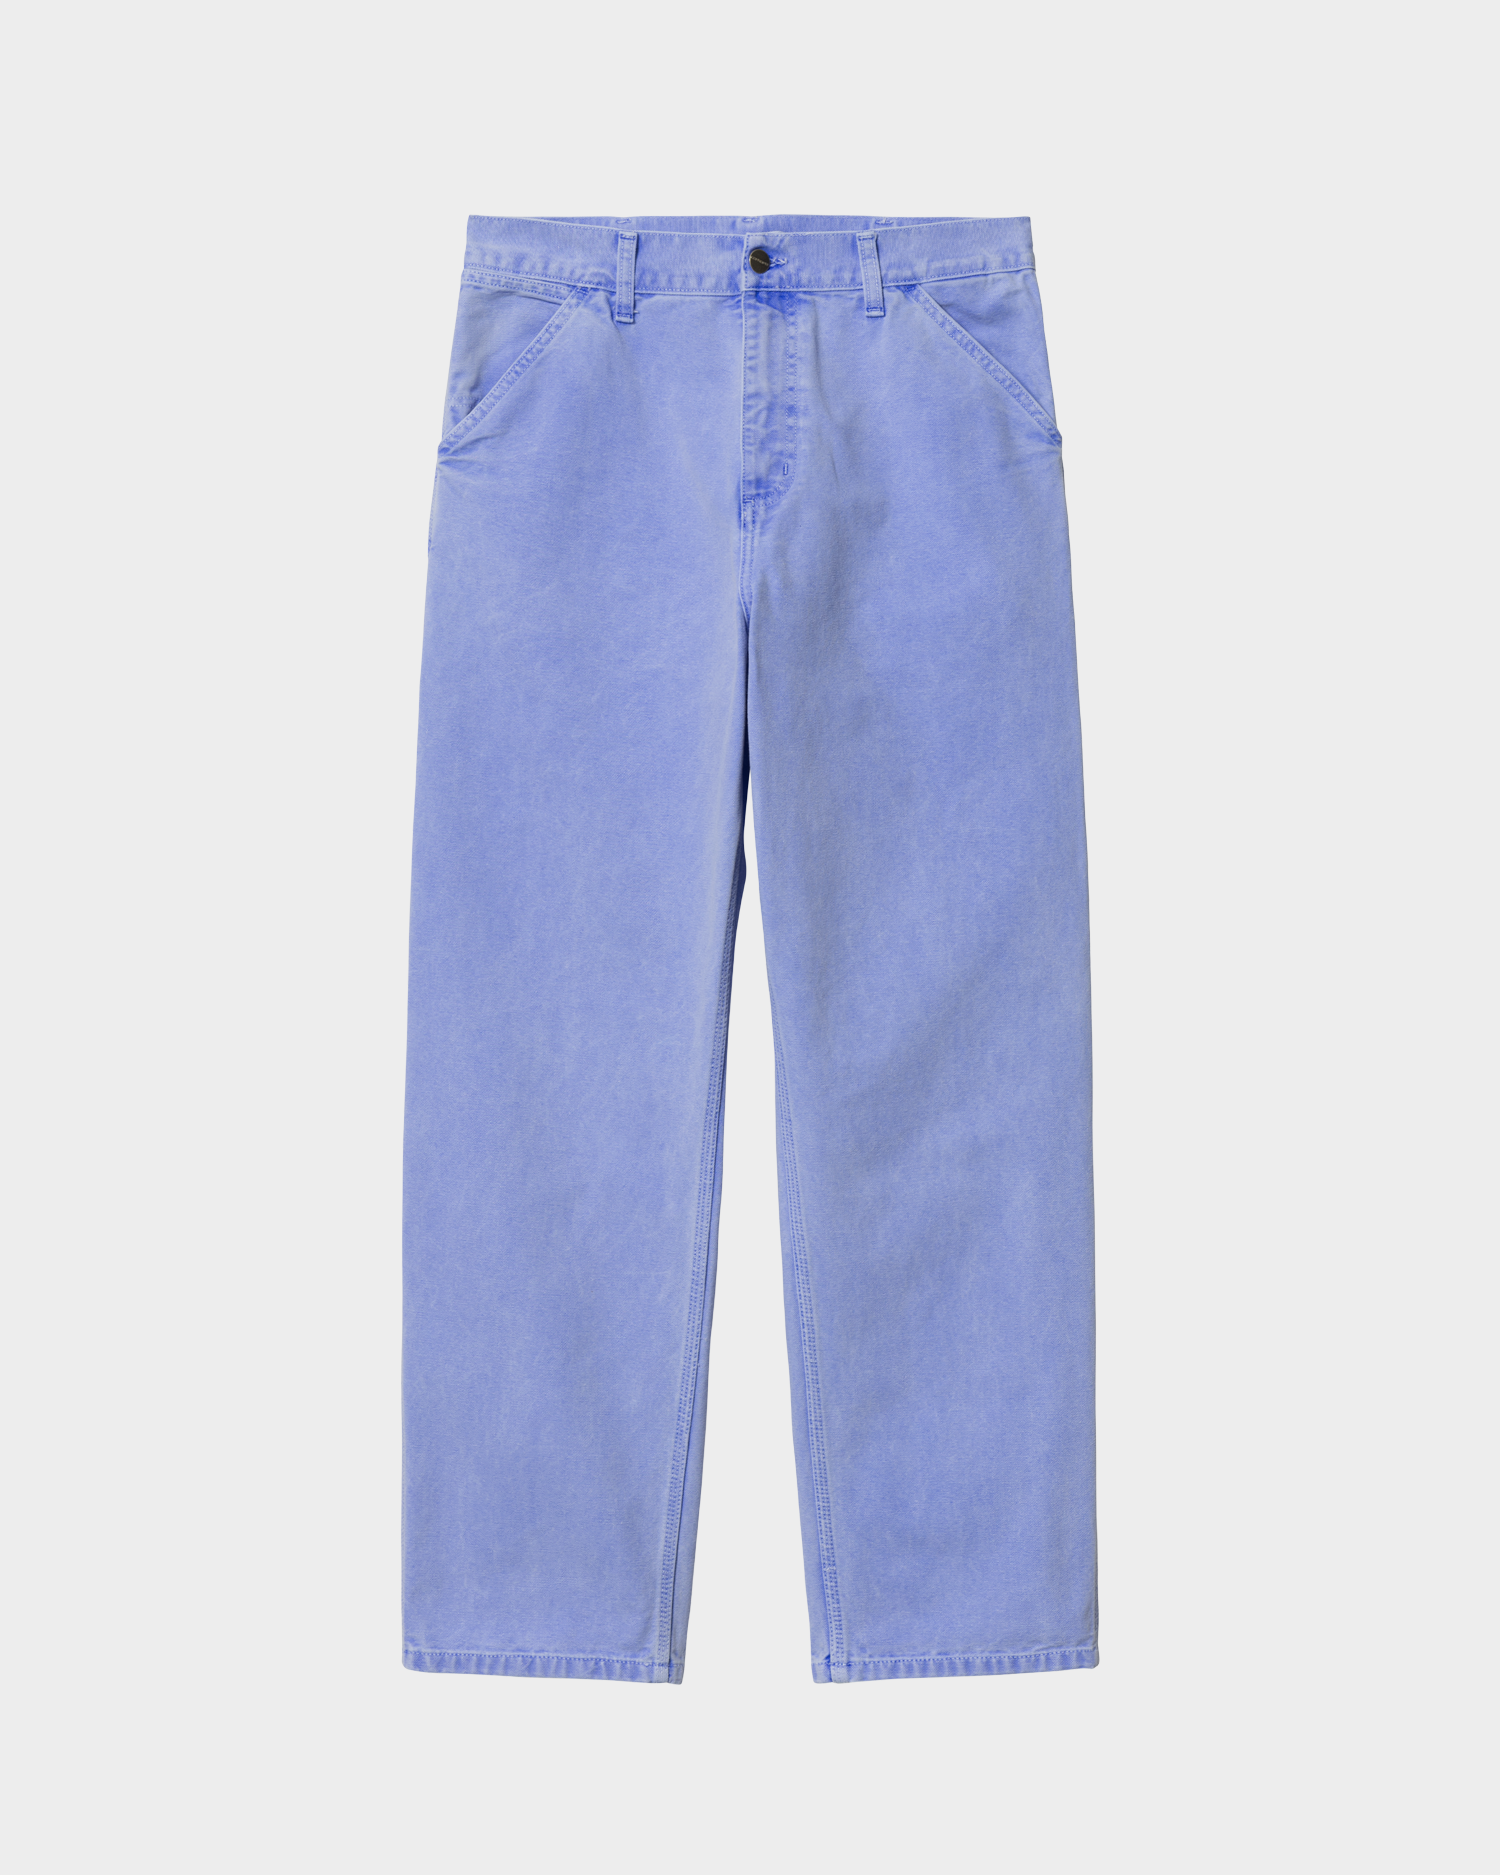 Carhartt Single Knee Pant Icy Water Faded